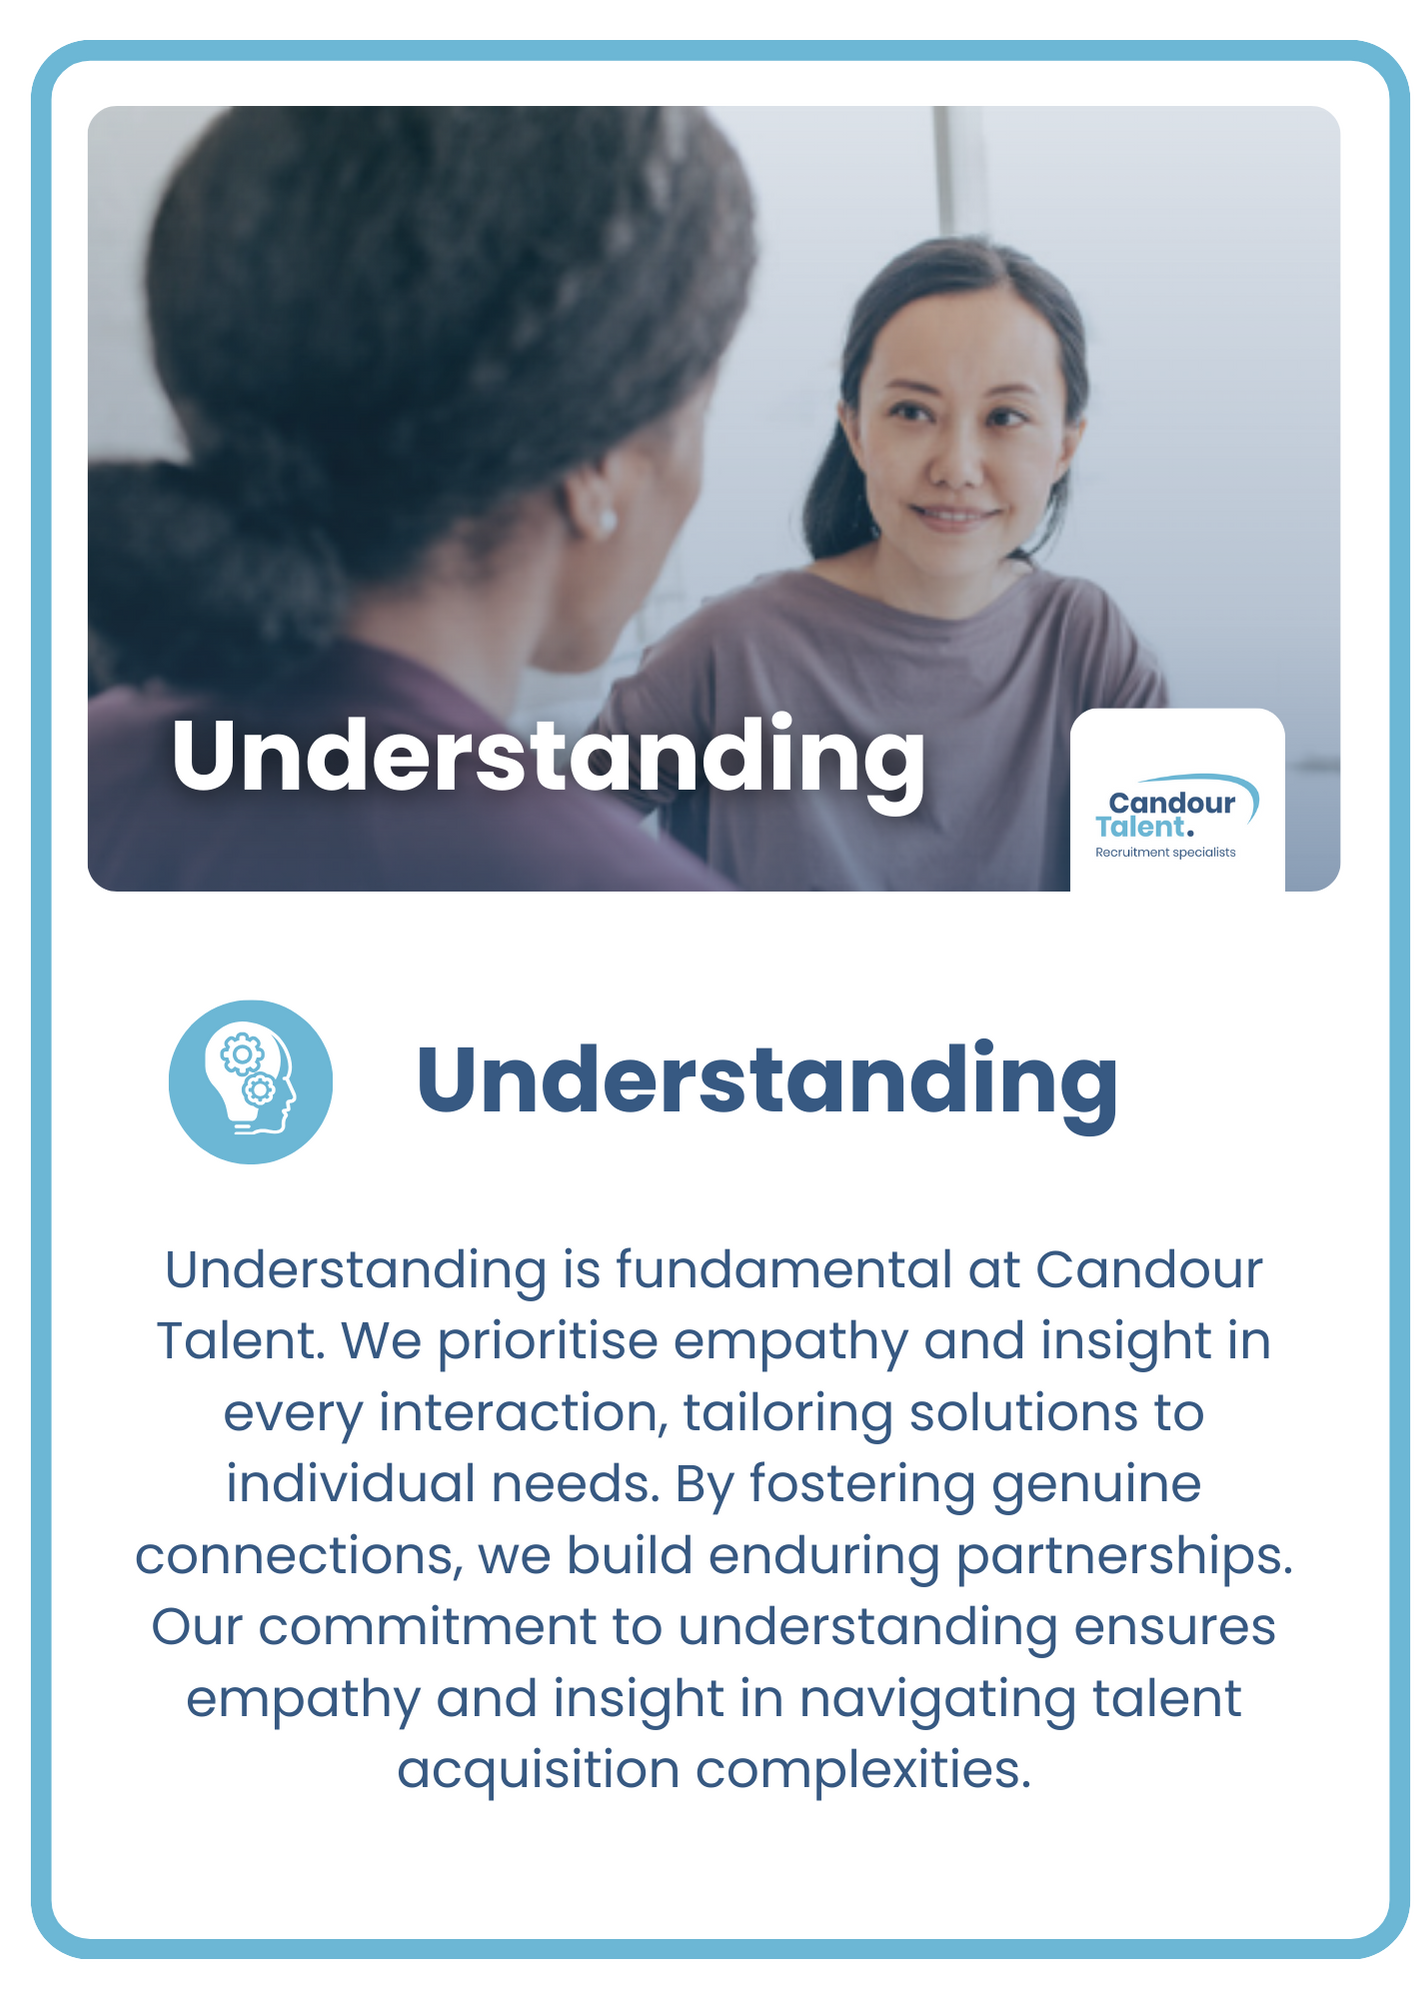 Candour Talent Recruitment Agency - Our Values page - our values of Understanding. Text: Understanding is fundamental at Candour Talent. We prioritise empathy and insight in every interaction, tailoring solutions to individual needs. By fostering genuine connections, we build enduring partnerships. Our commitment to understanding ensures empathy and insight in navigating talent acquisition complexities.